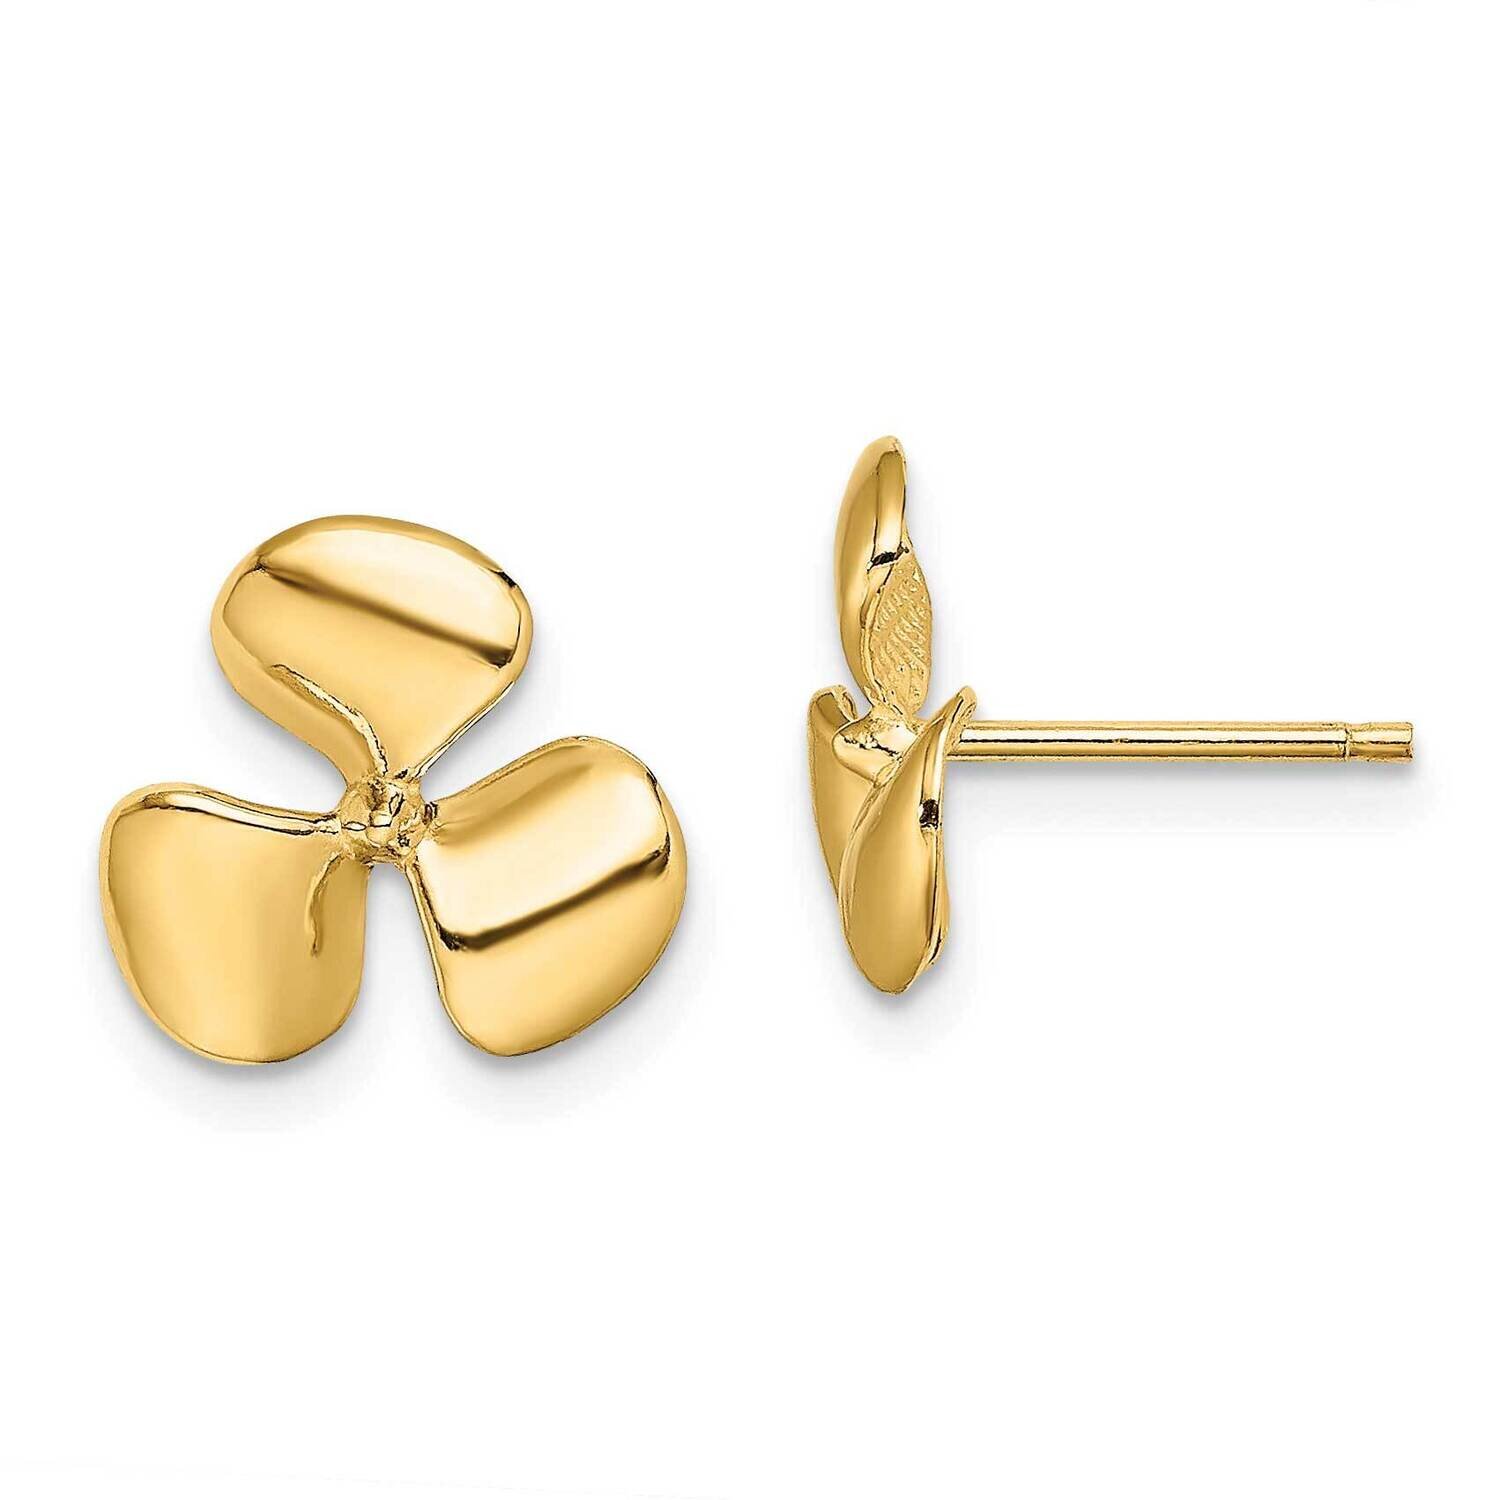 Three Blade Propeller with Center Bead Post Earrings 14k Gold Polished TE747